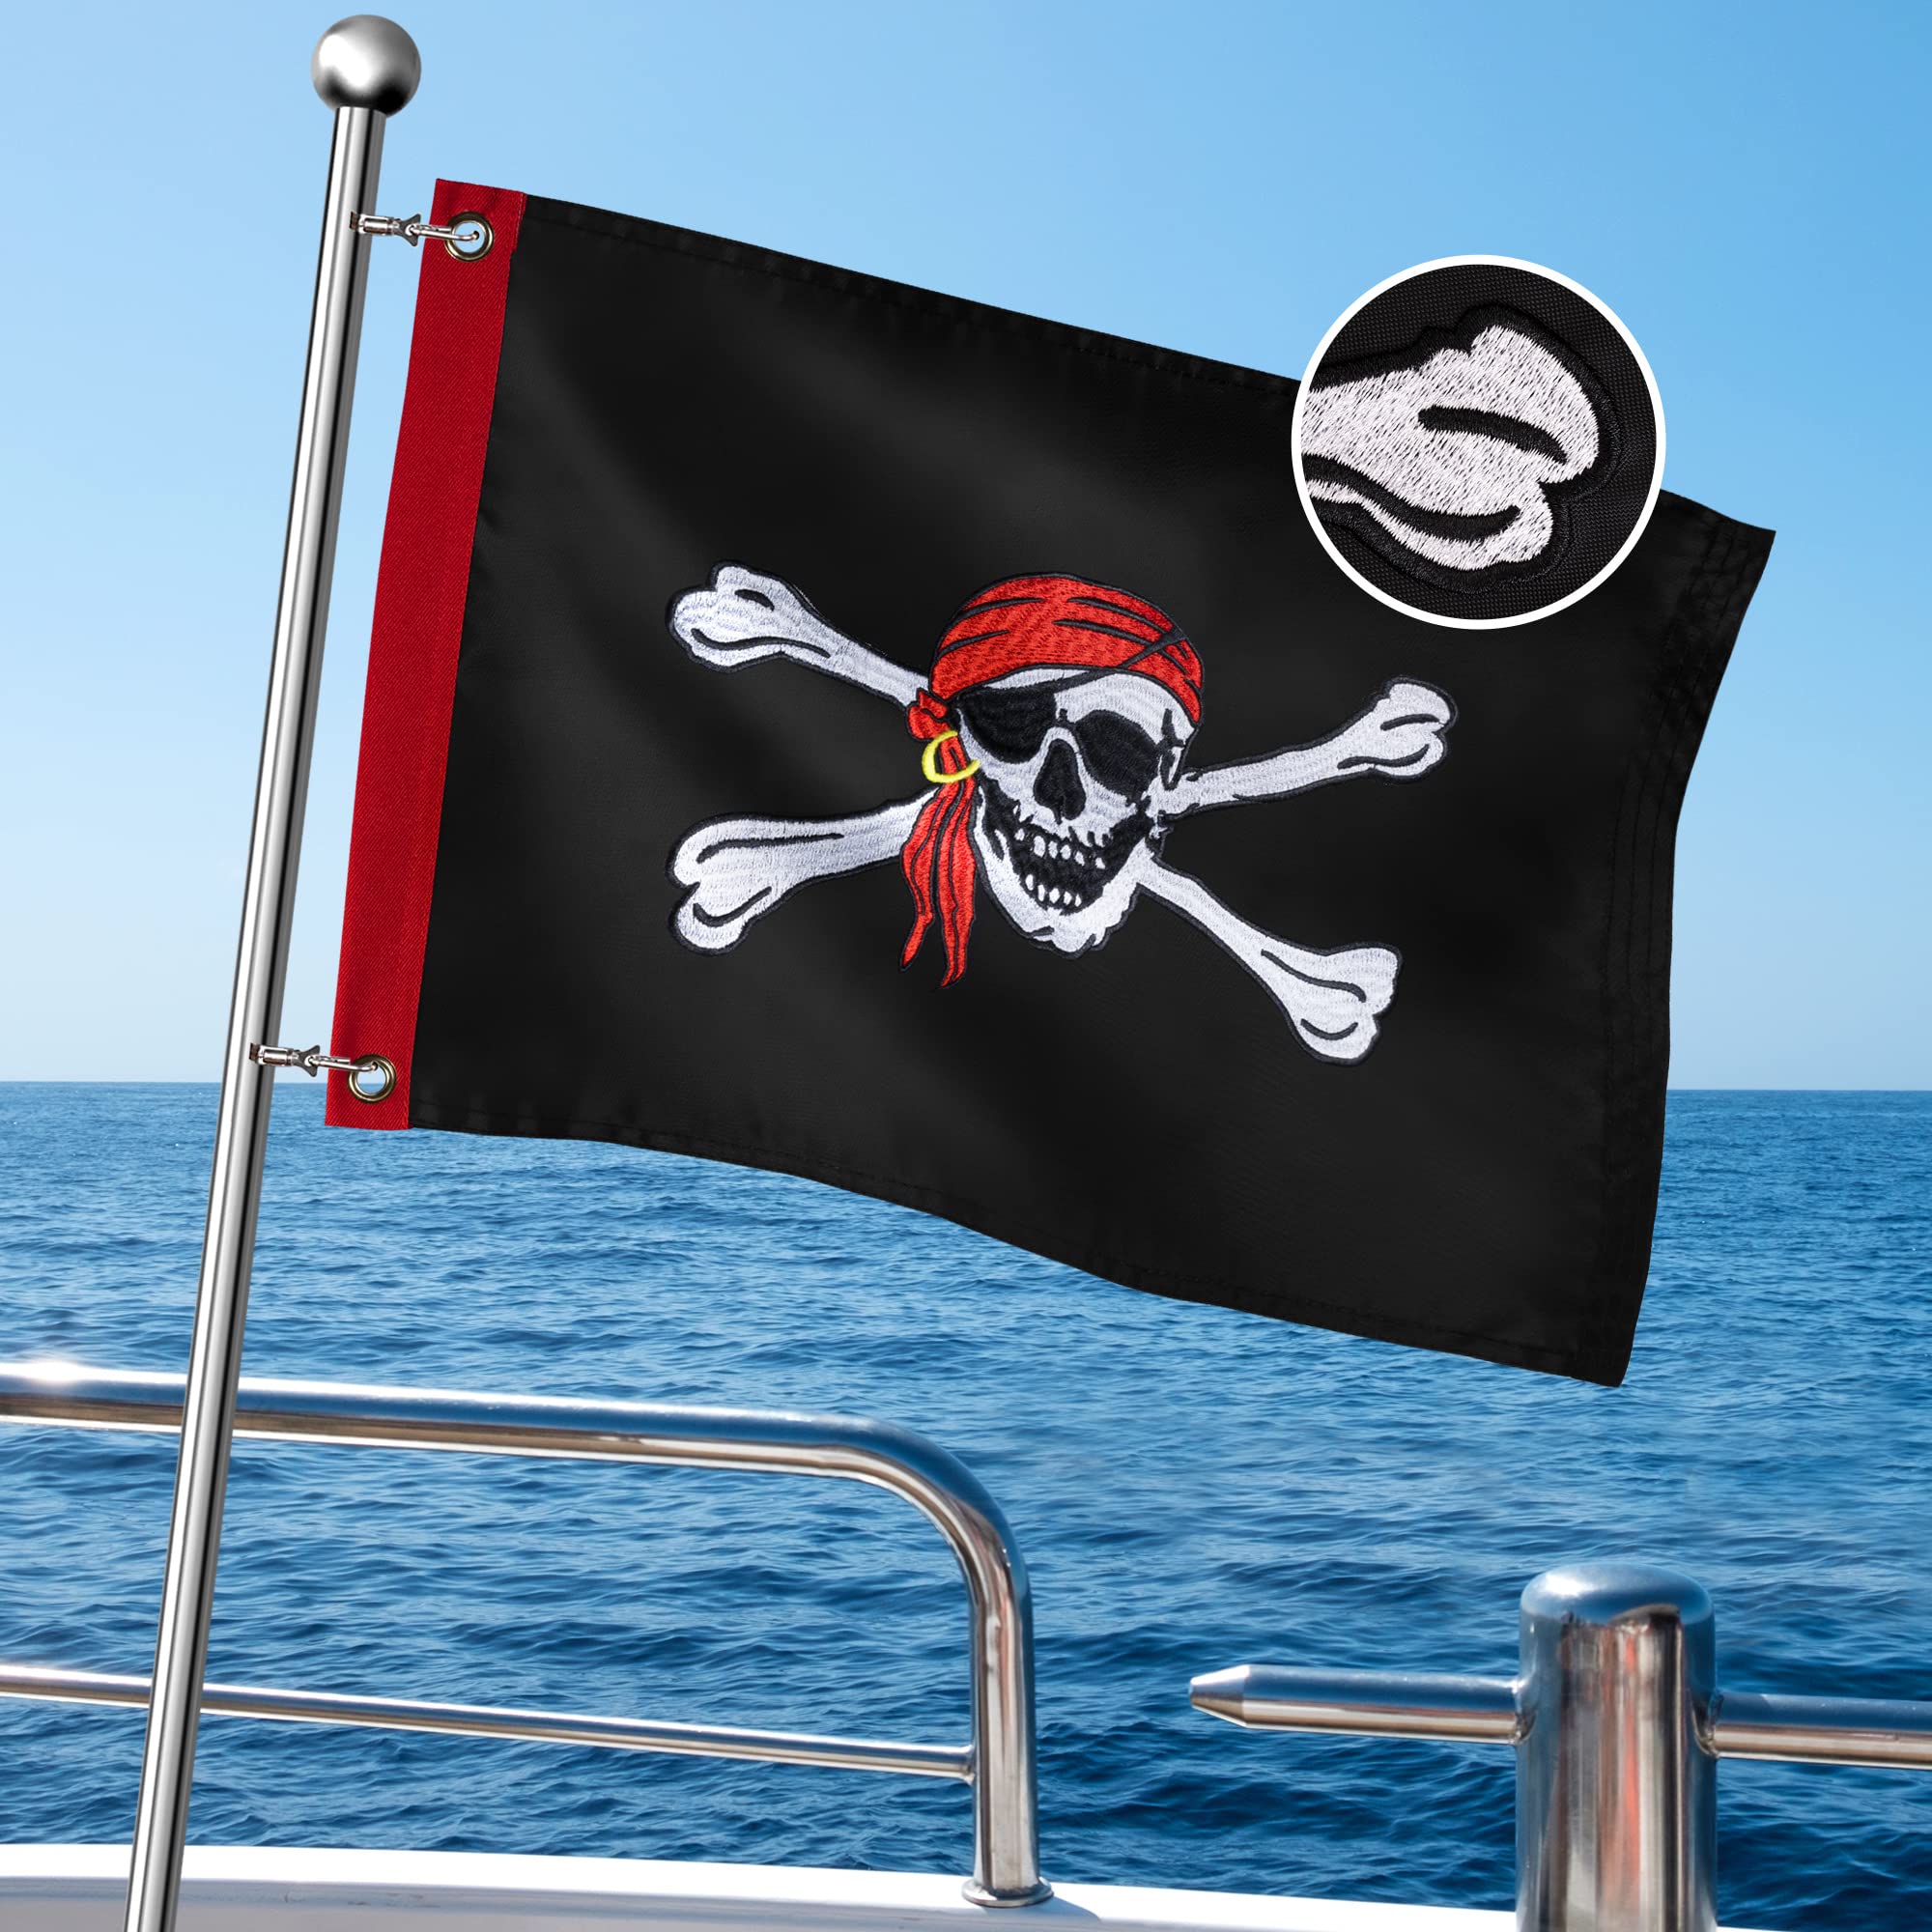 XIFAN Premium Pirate Jolly Roger Flag for Boat 12x18 Inch, Embroidered Red  Bandanna Skull and Cross